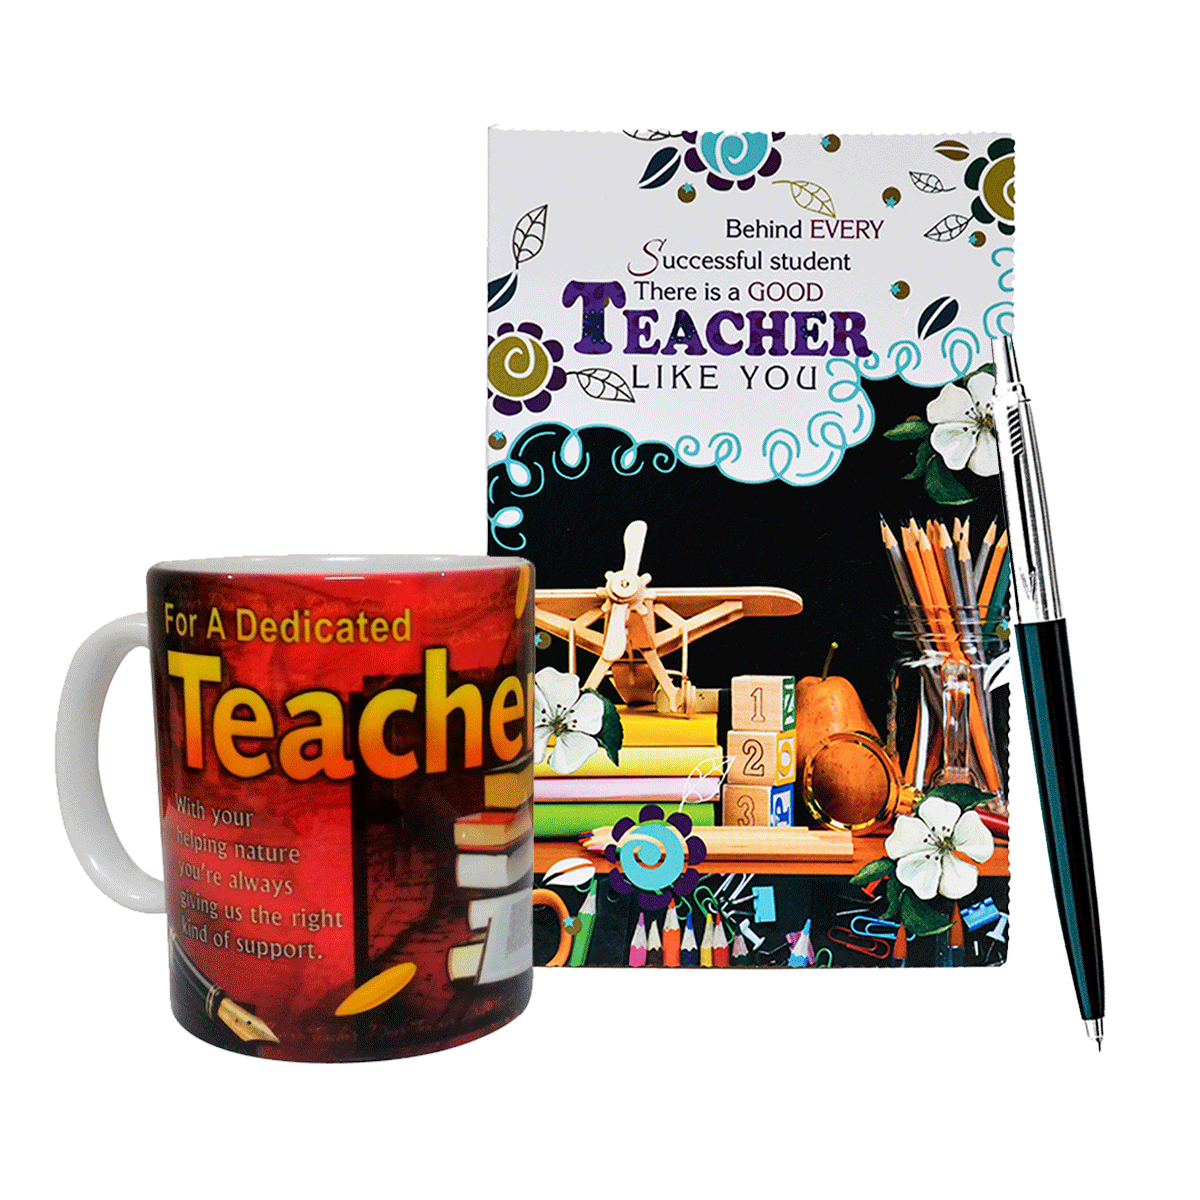 15 Excellent Teachers Day Gift Ideas For Students  Styles At Life